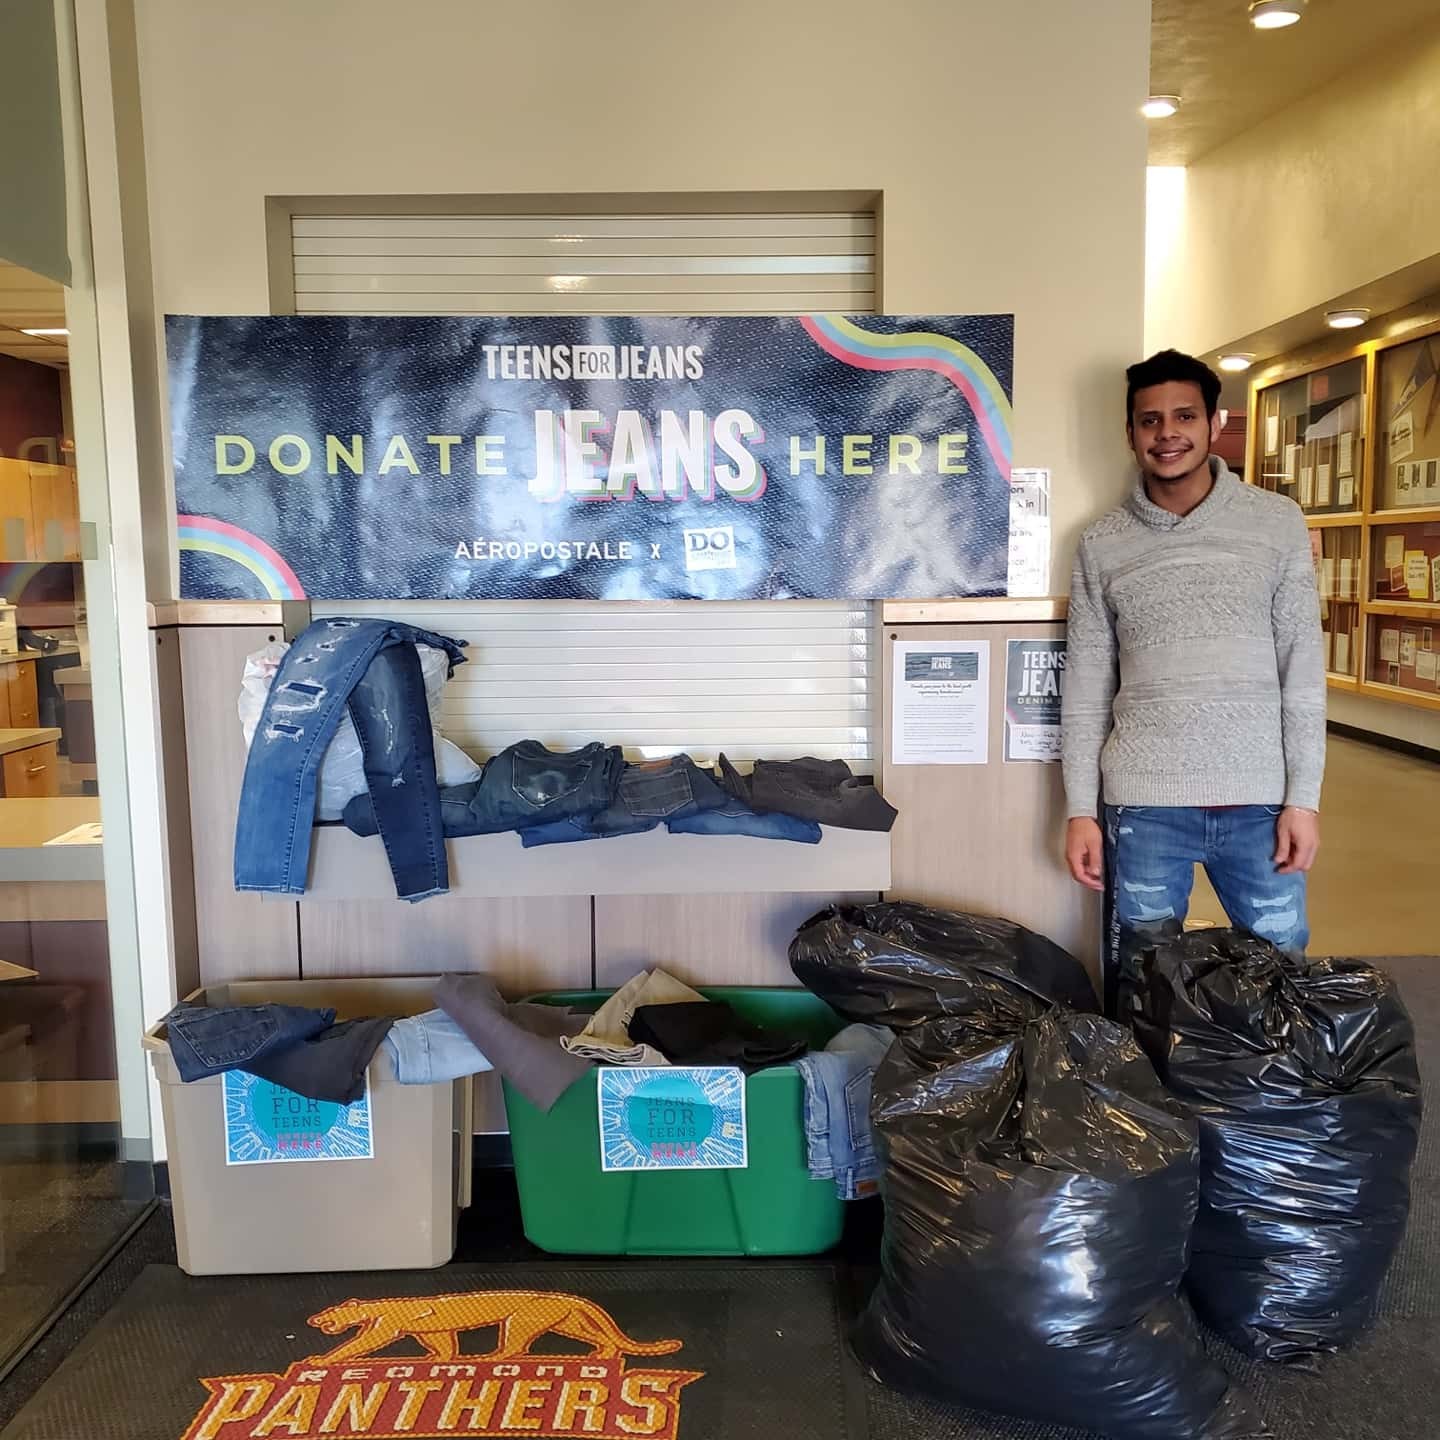 Your Donated Jeans Could Help Build a Home